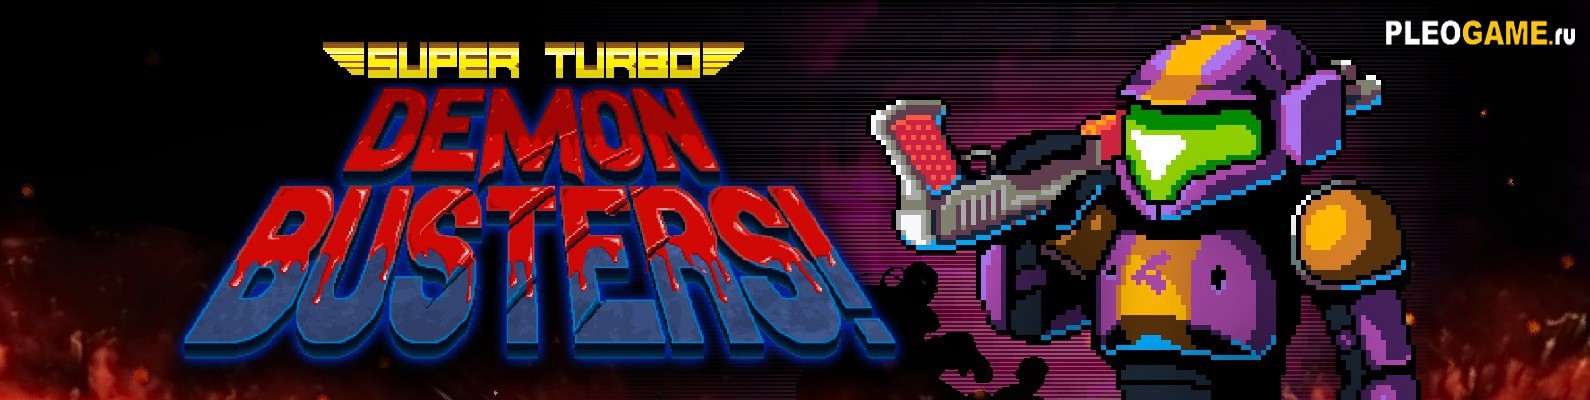 Super Turbo Demon Busters! (2017) -  